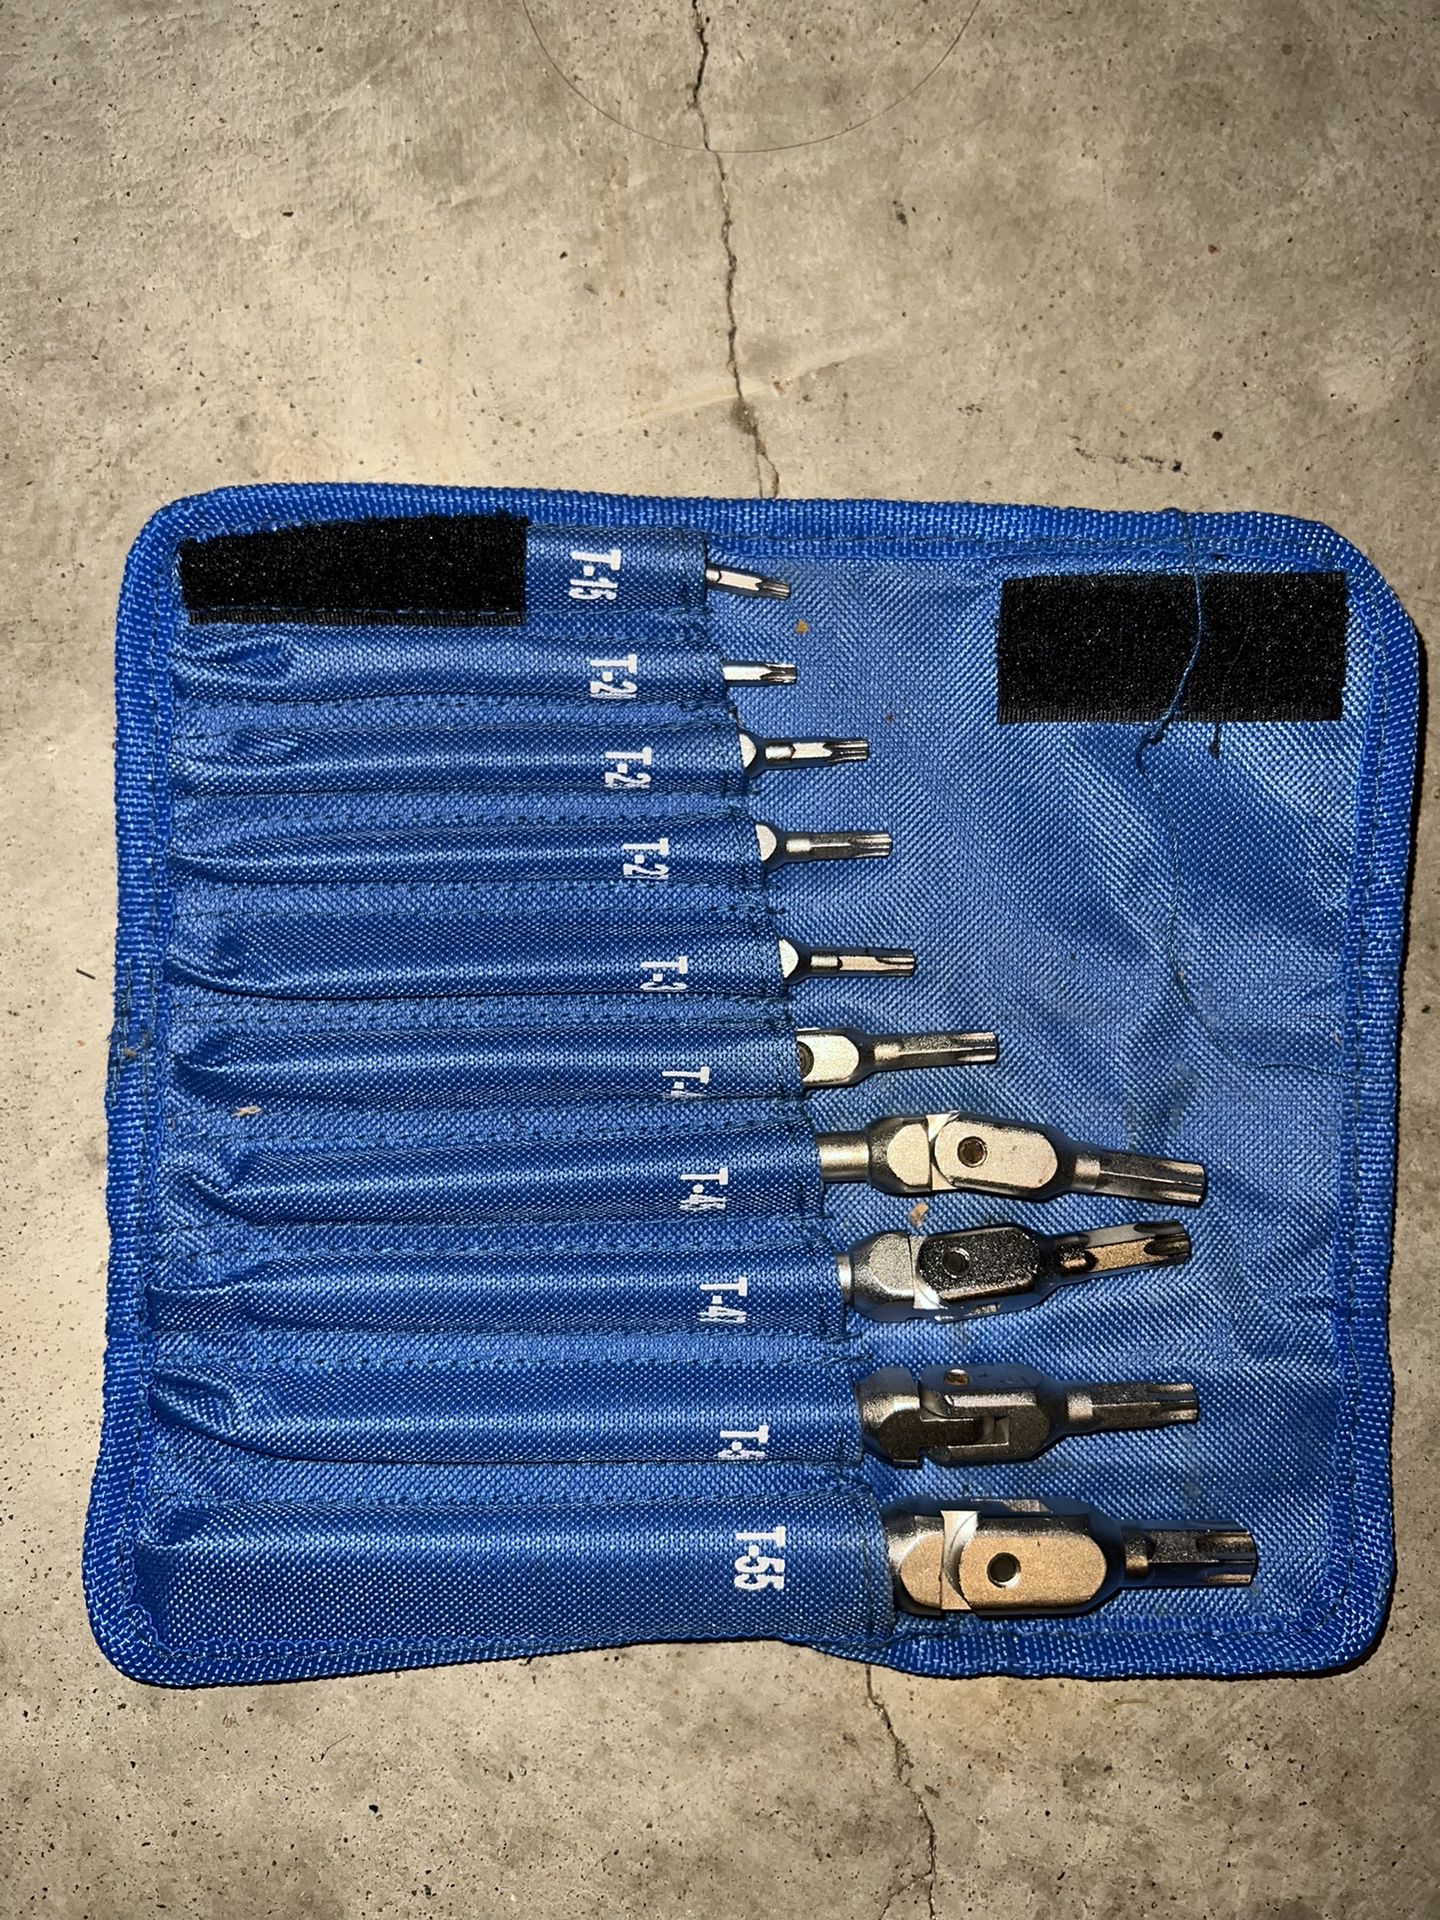 Star Pro Wrench Set